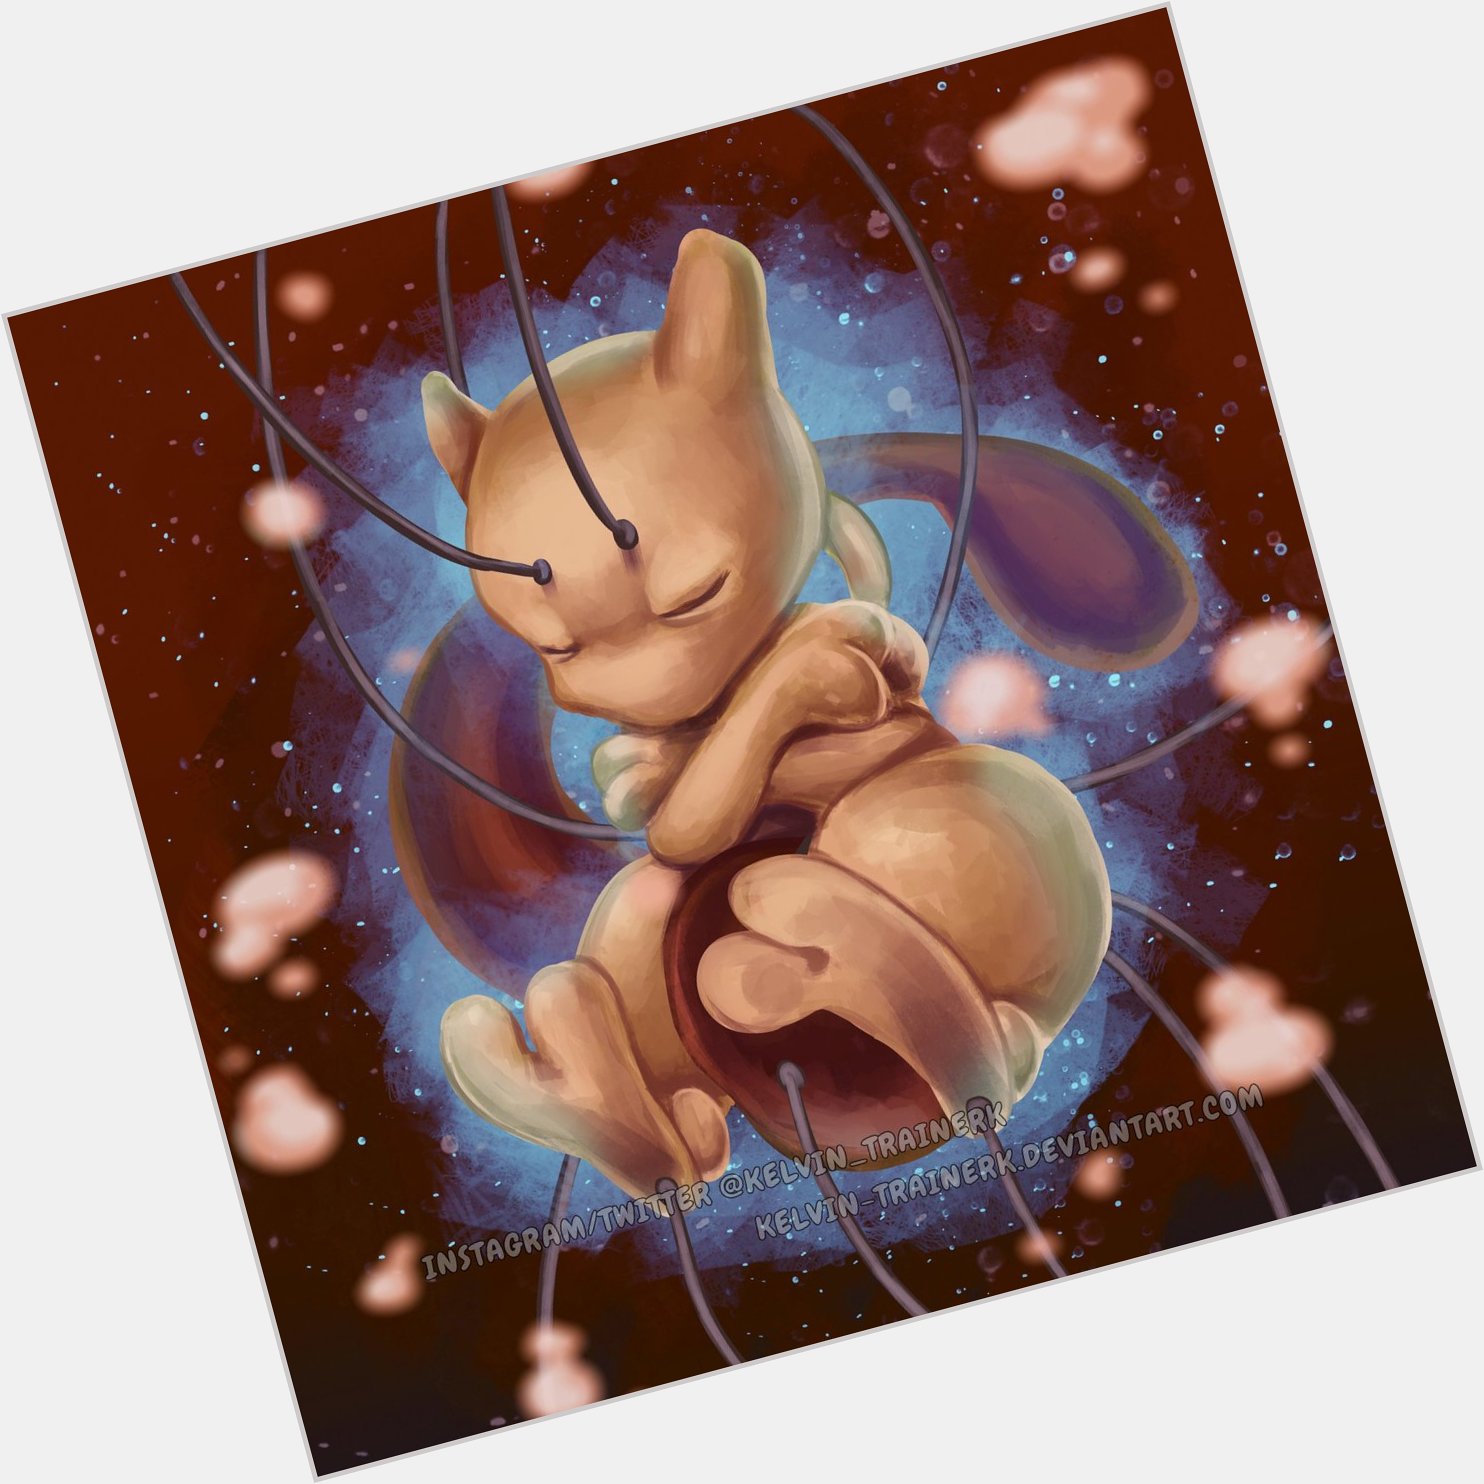 Birth of Mewtwo <3

Happy Birthday Enjoy this drawing! RTs are appreciated   